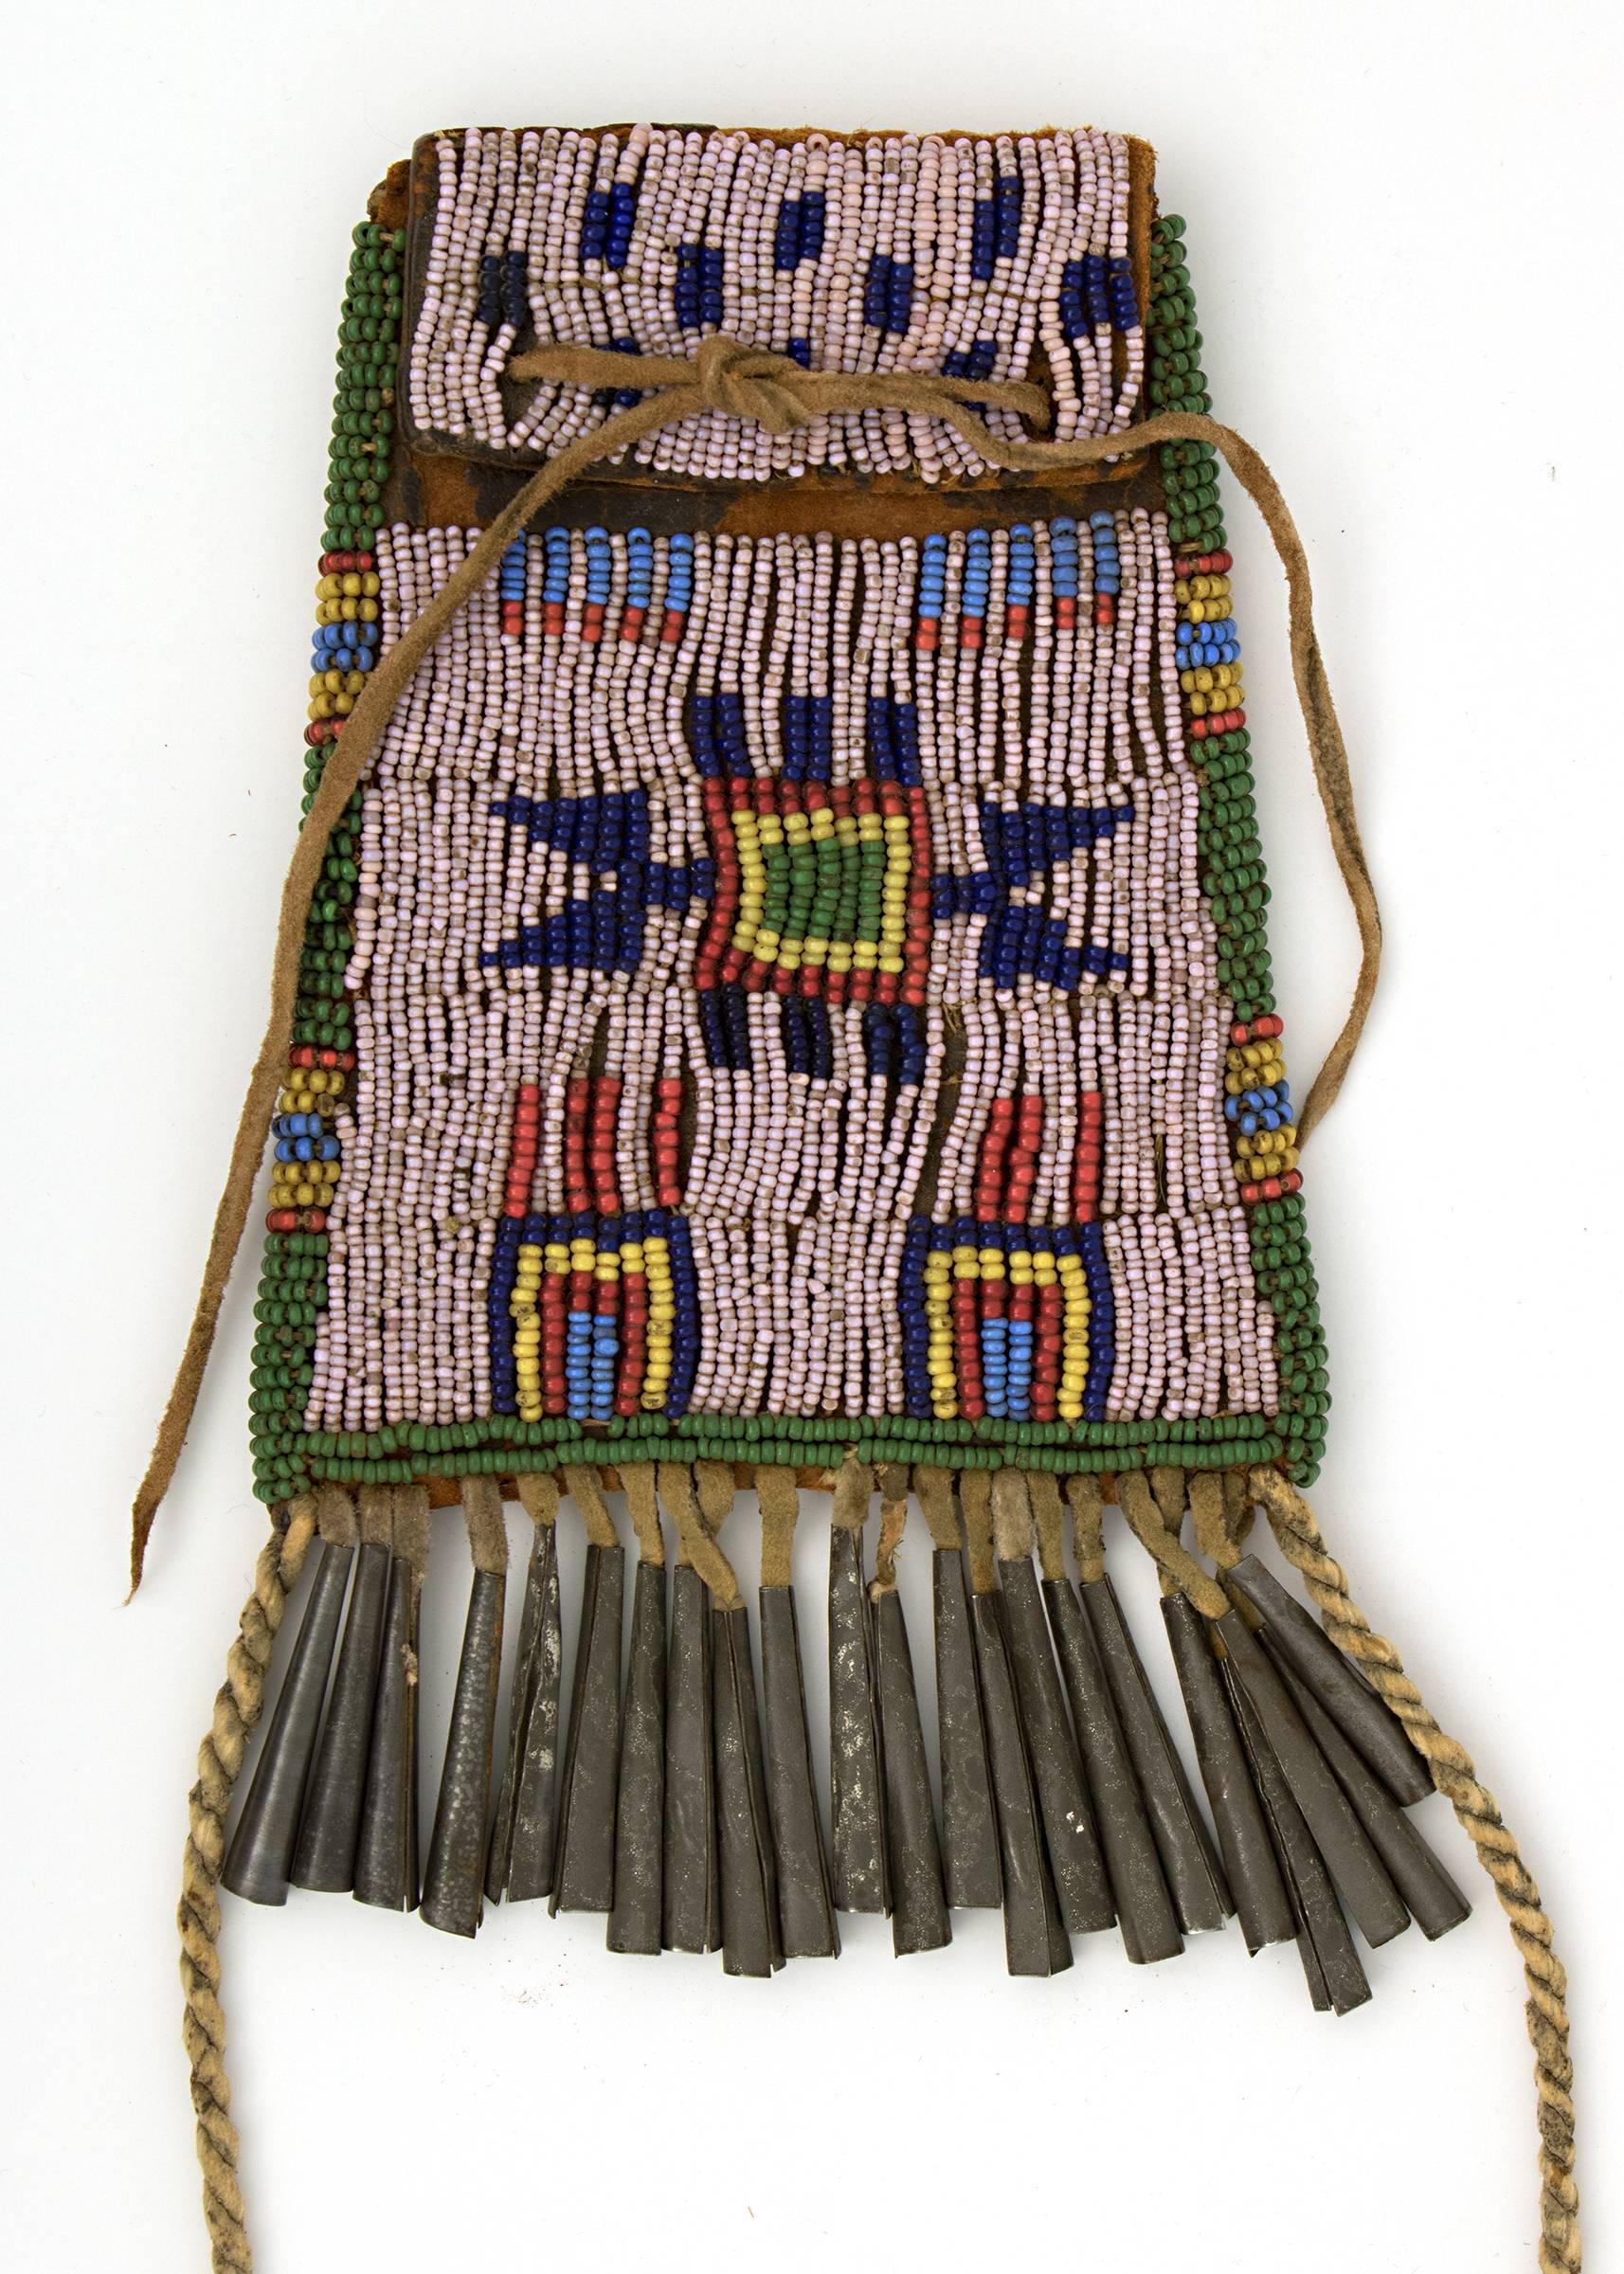 Northern Arapaho Strike-A-Lite bag. Constructed of commercial harness leather with trade beads and tin cones.

The Arapaho, members of the Plains Indian culture group, were nomadic with territory extending across parts of present day Colorado,